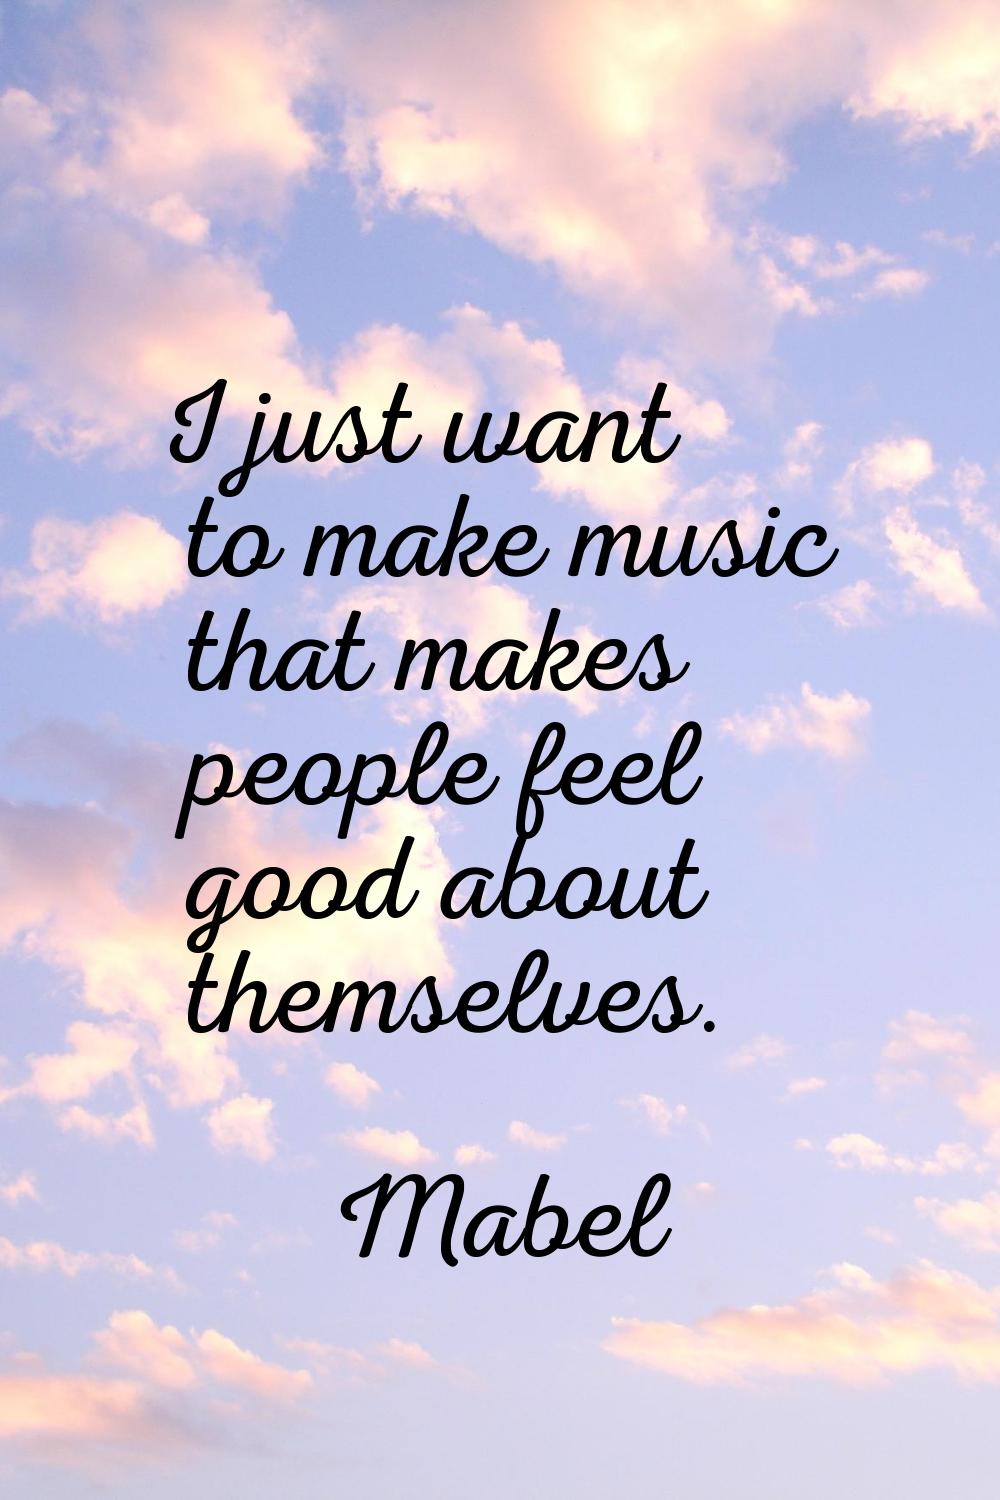 I just want to make music that makes people feel good about themselves.